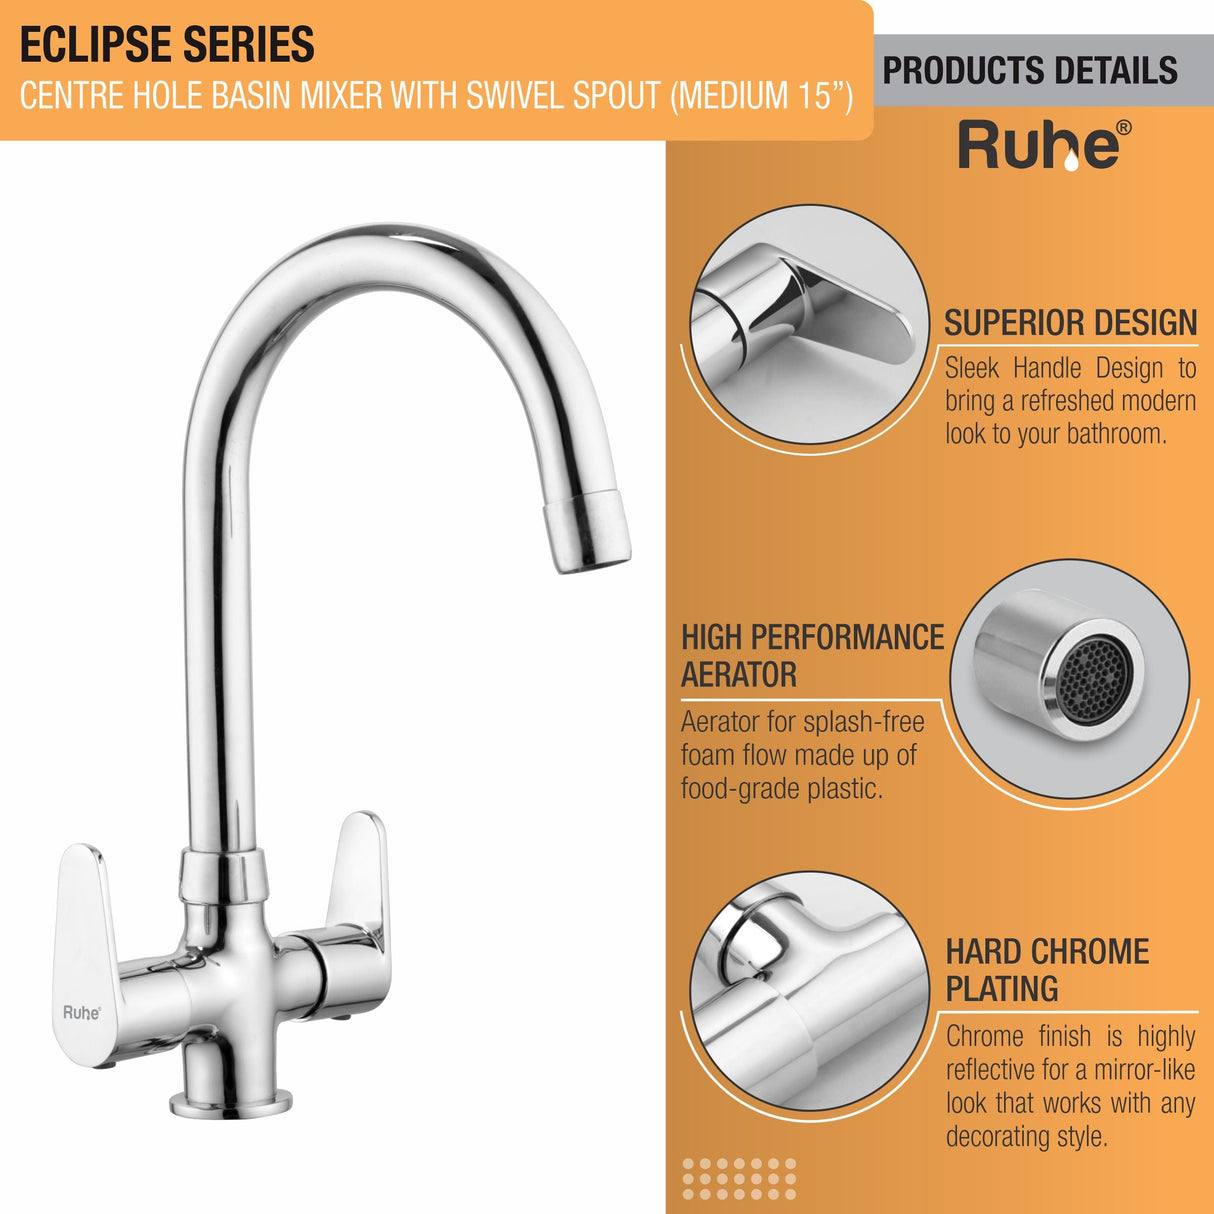 Eclipse Centre Hole Basin Mixer with Medium (15 inches) Round Swivel Spout Faucet product details